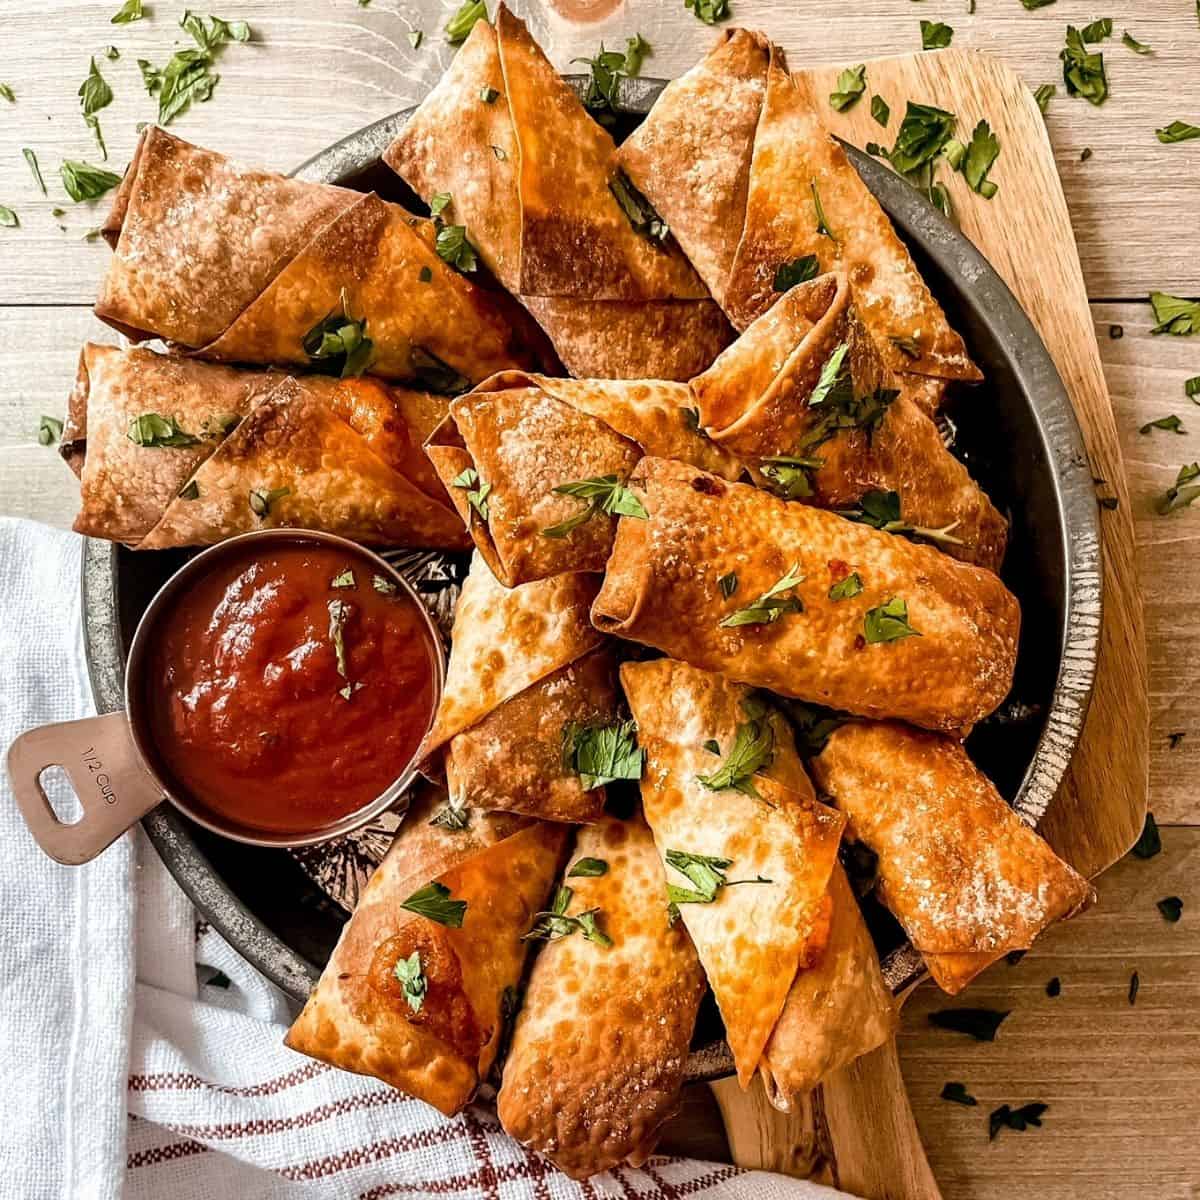 air fryer pizza rolls cooked, in a silver round pie plate, with marinara sauce on the side, garnished with parsley, red and white striped towel in the bottom left corner